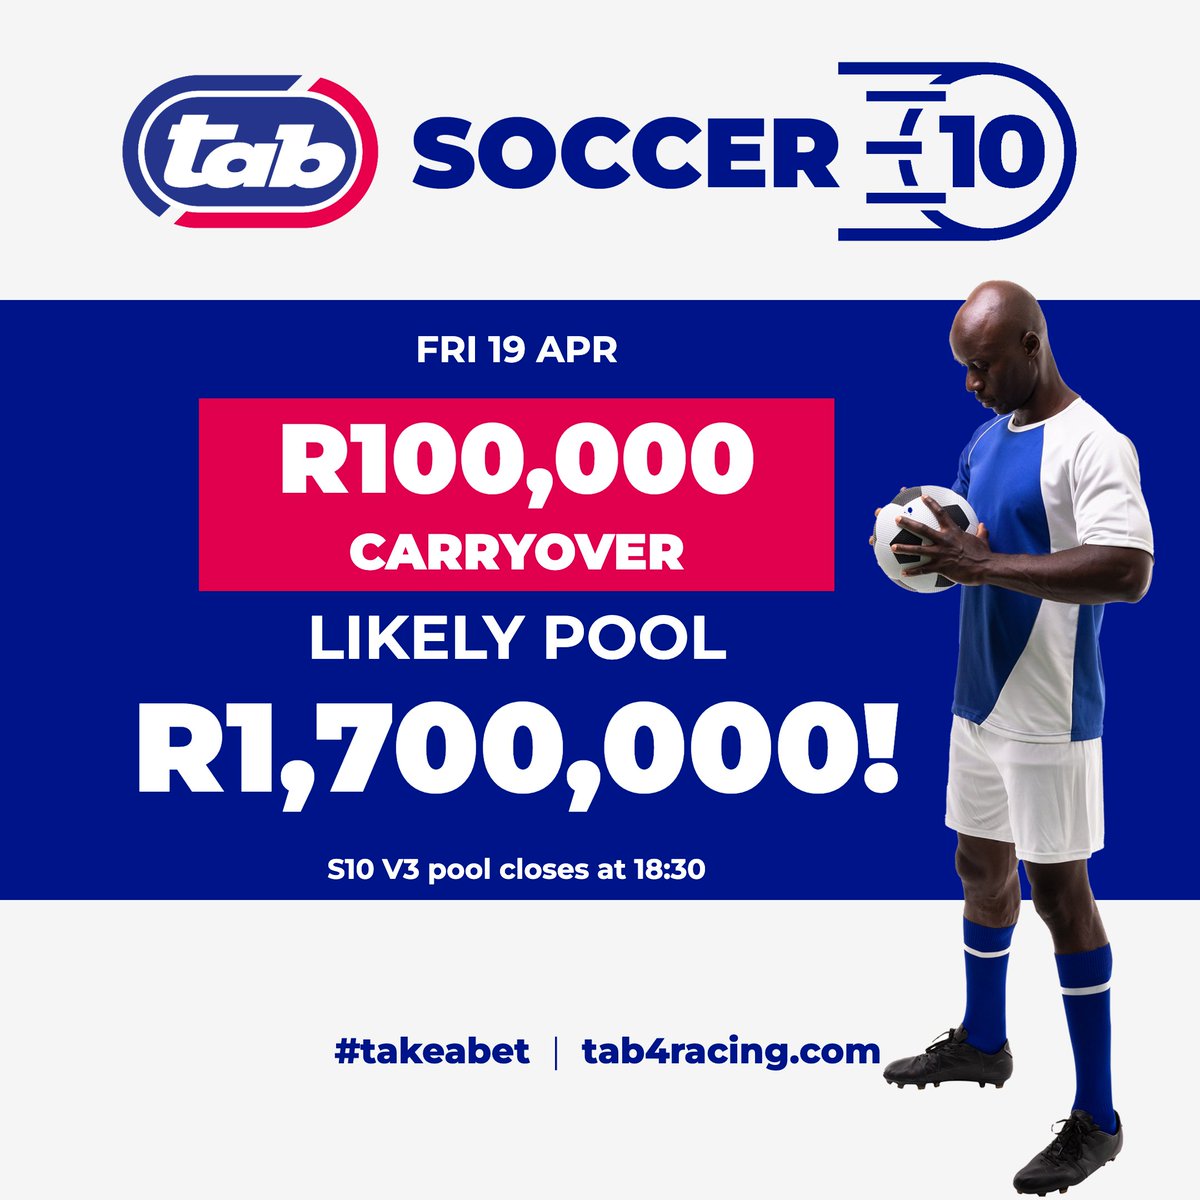 Ready to turn your couch into a throne and your TV into a treasure map? Soccer10 V3 is back with a carryover of R100,000, you might need a lifeguard for your cash! Dive into the weekend like a money magnet - let's make it rain R1,700,000! 💰